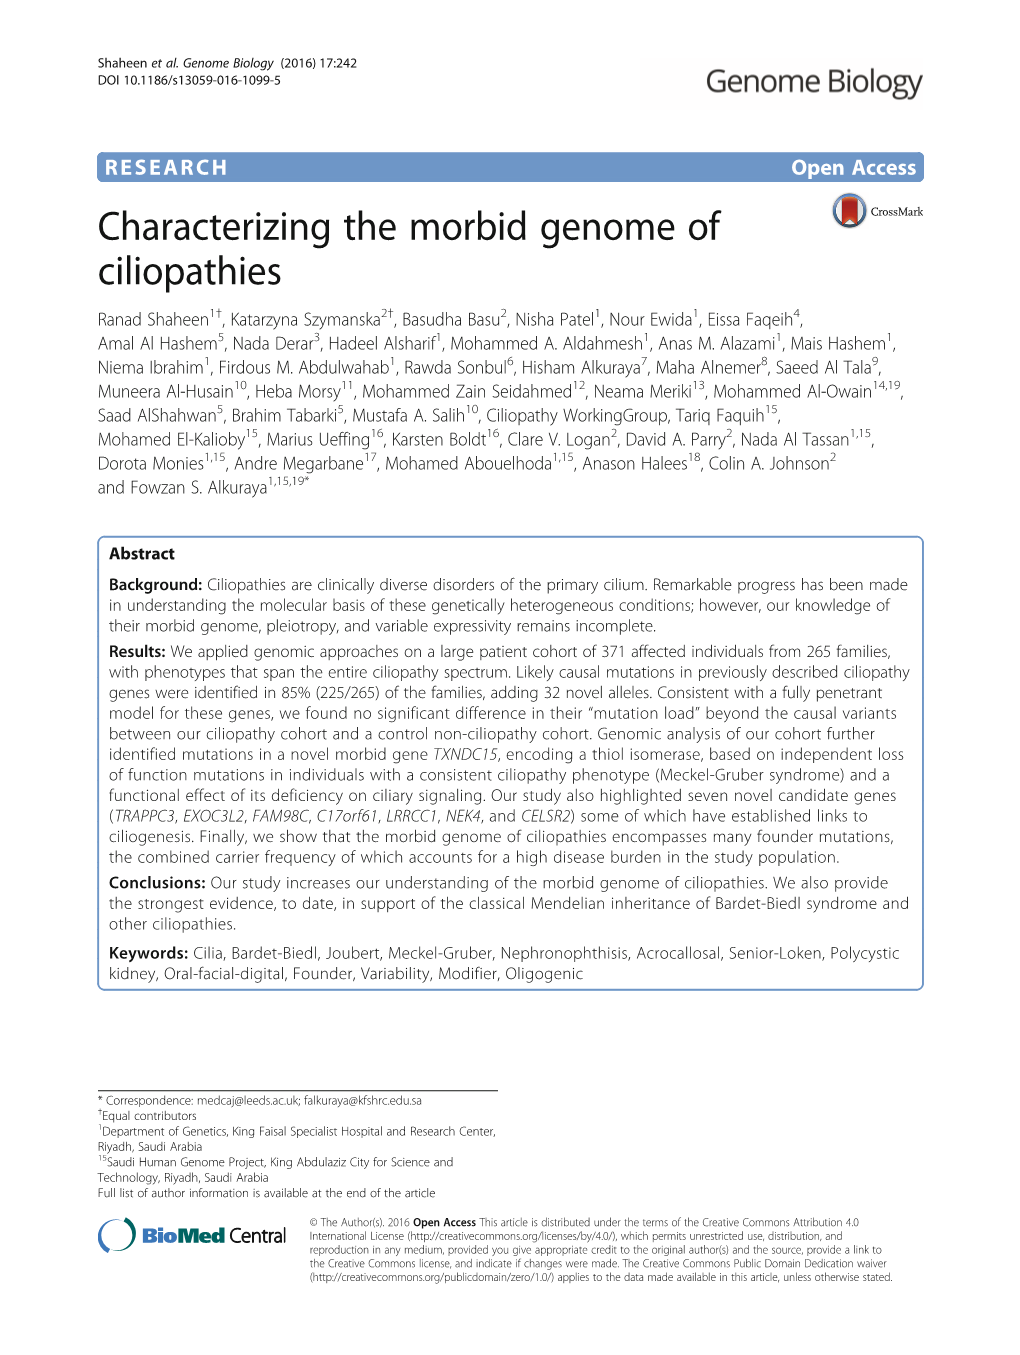 Characterizing the Morbid Genome of Ciliopathies